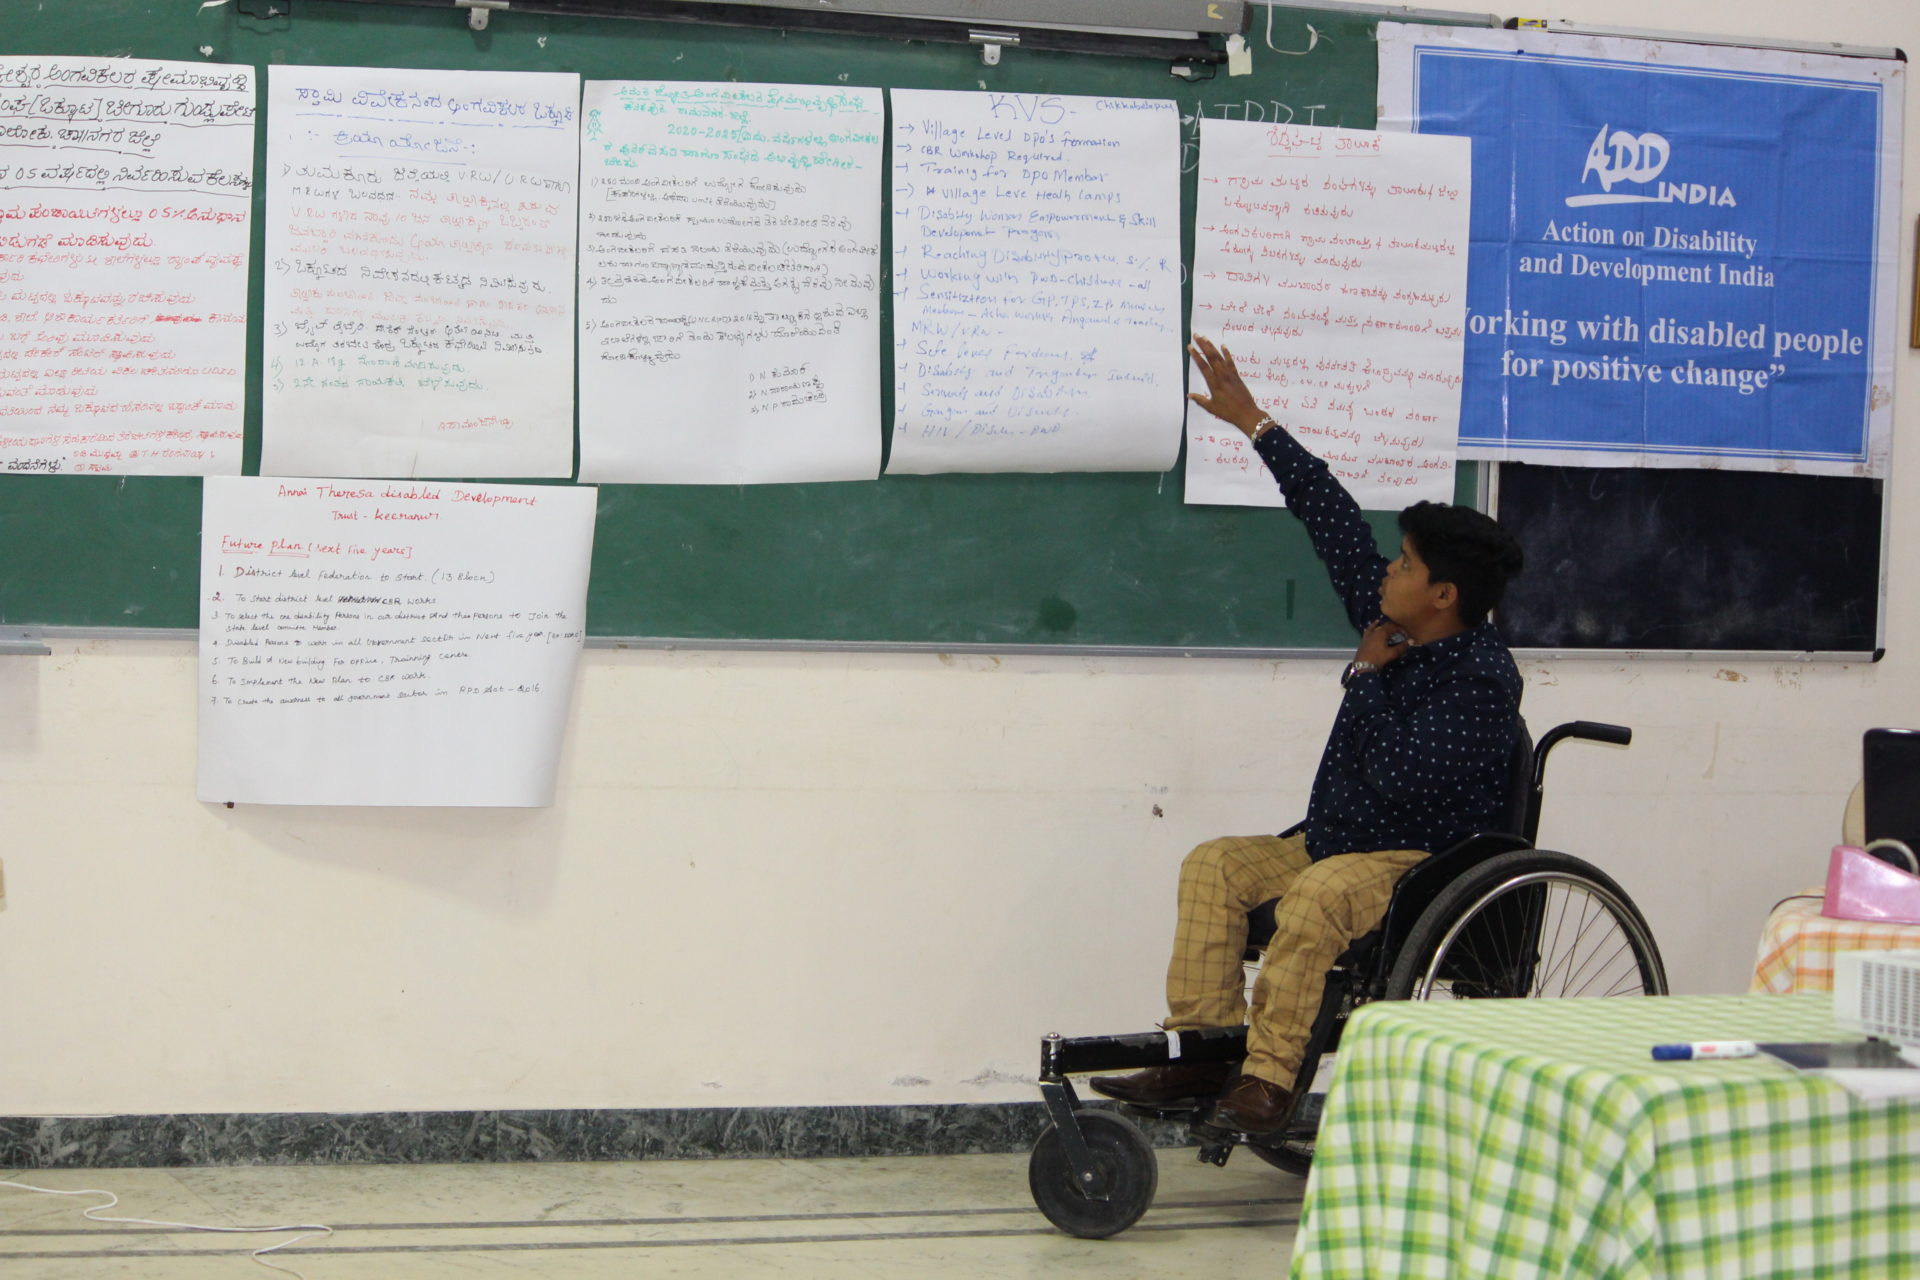 Action on Disability and Development India